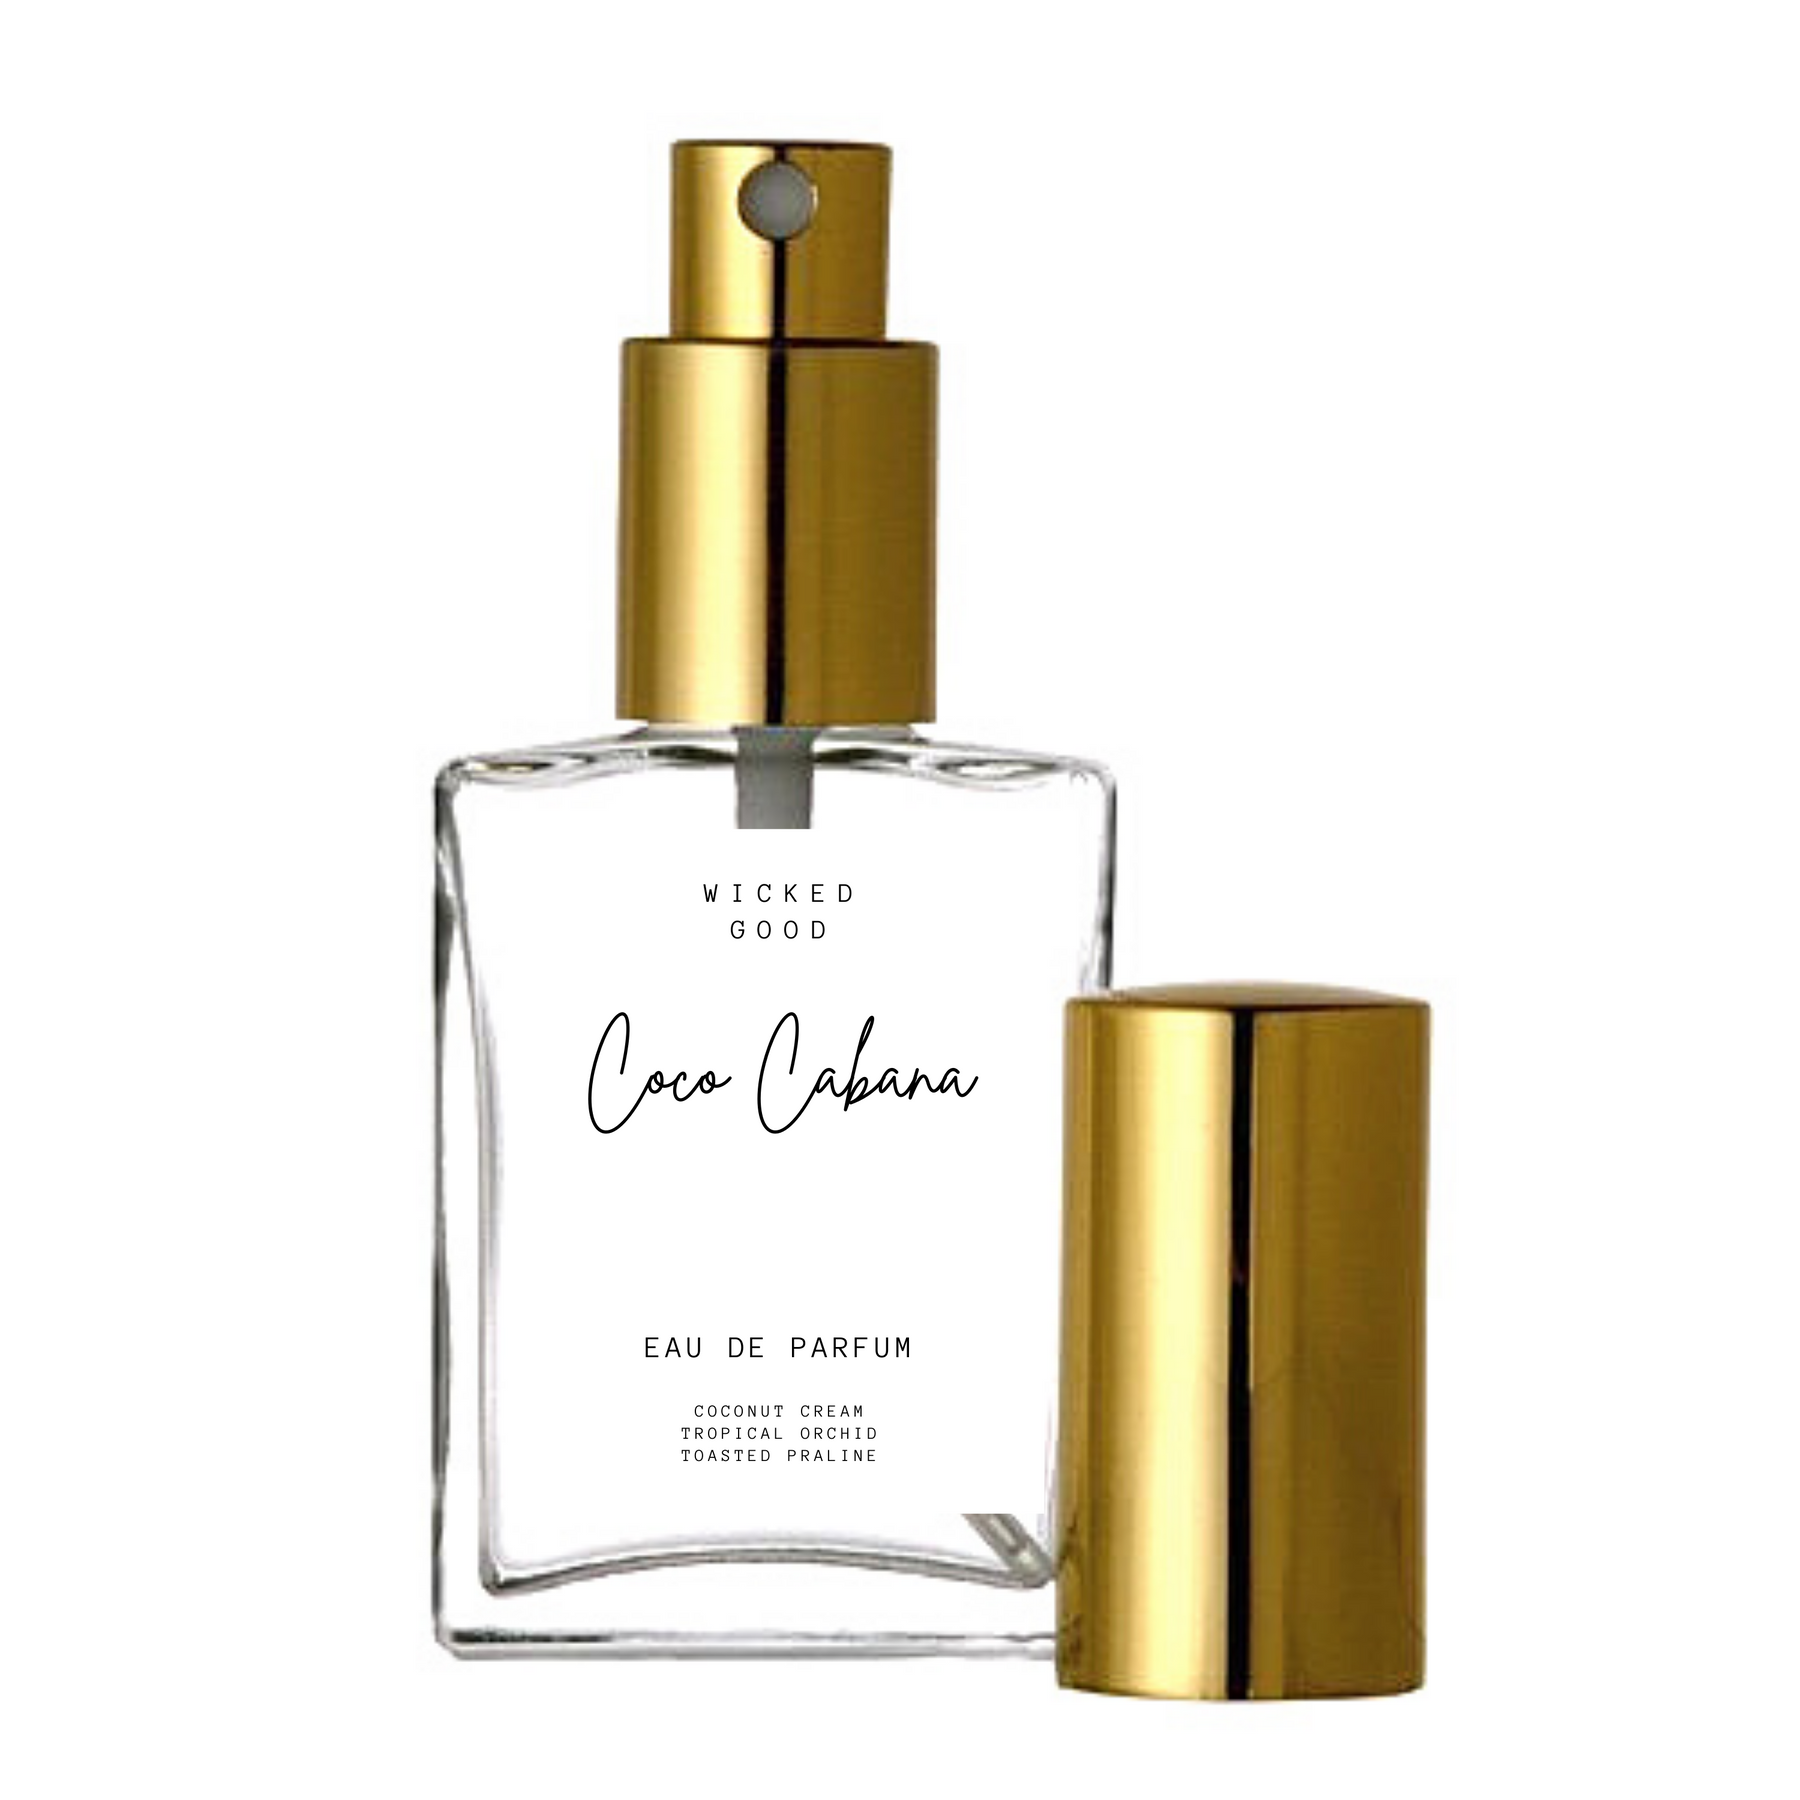 the must-smell fragrance for summer: @soldejaneiro Coco Cabana! If